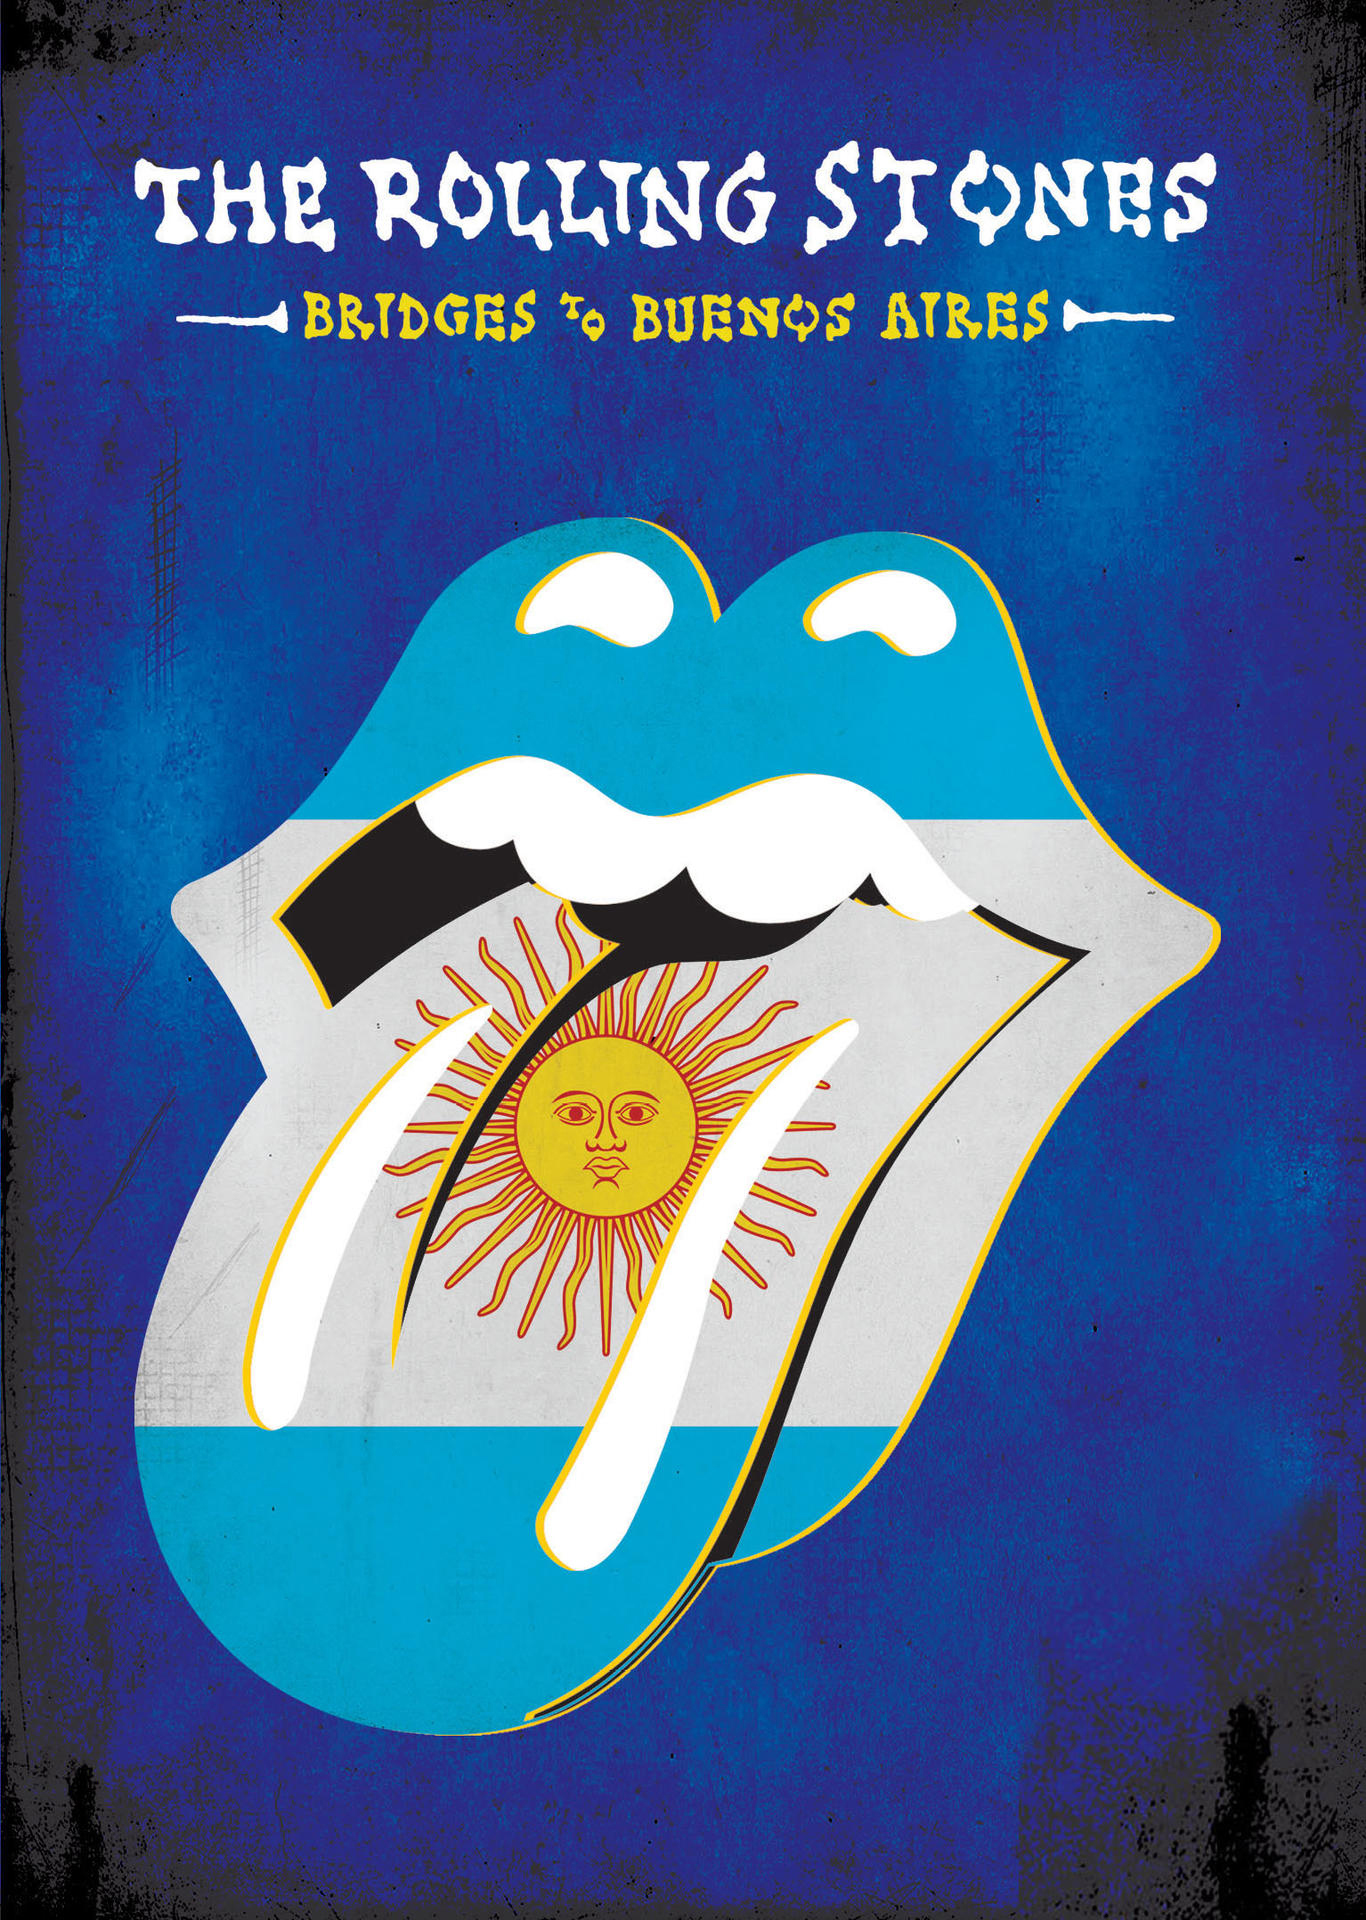 The Rolling (DVD) Aires To Bridges - - Buenos Stones